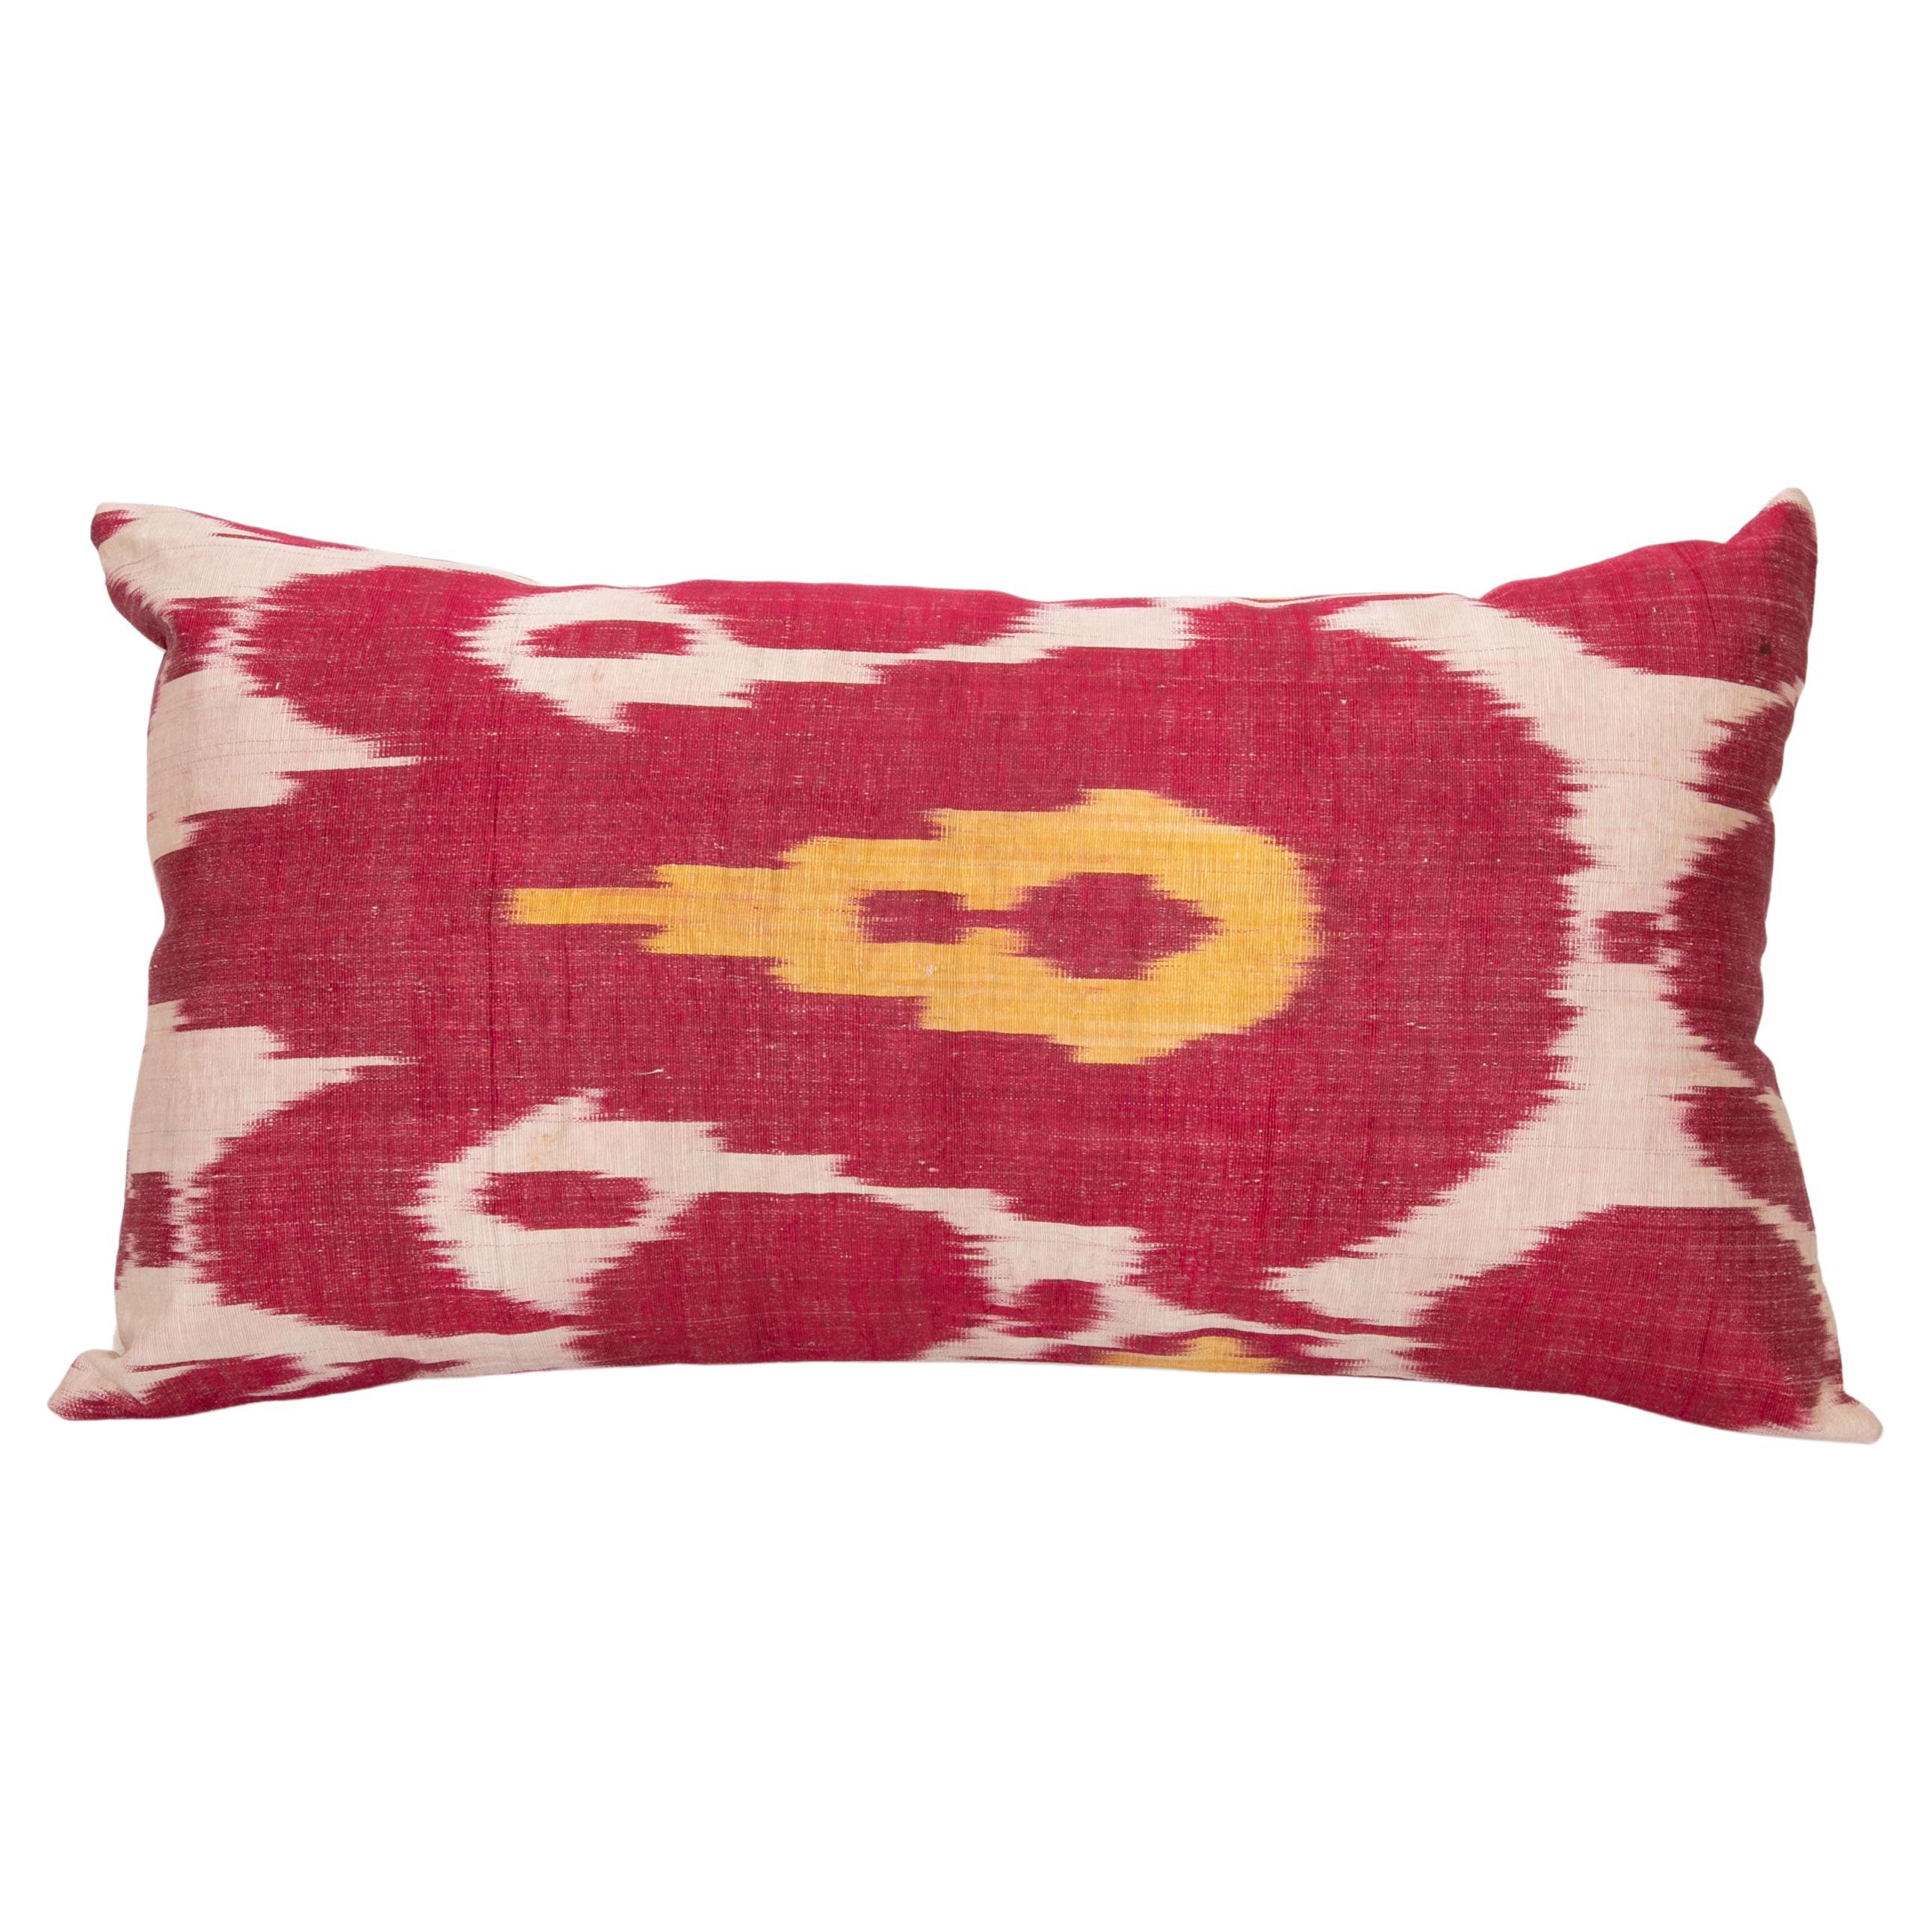 Ikat Pillow Cover Made from an Antique Silk and Cotton Ikat For Sale